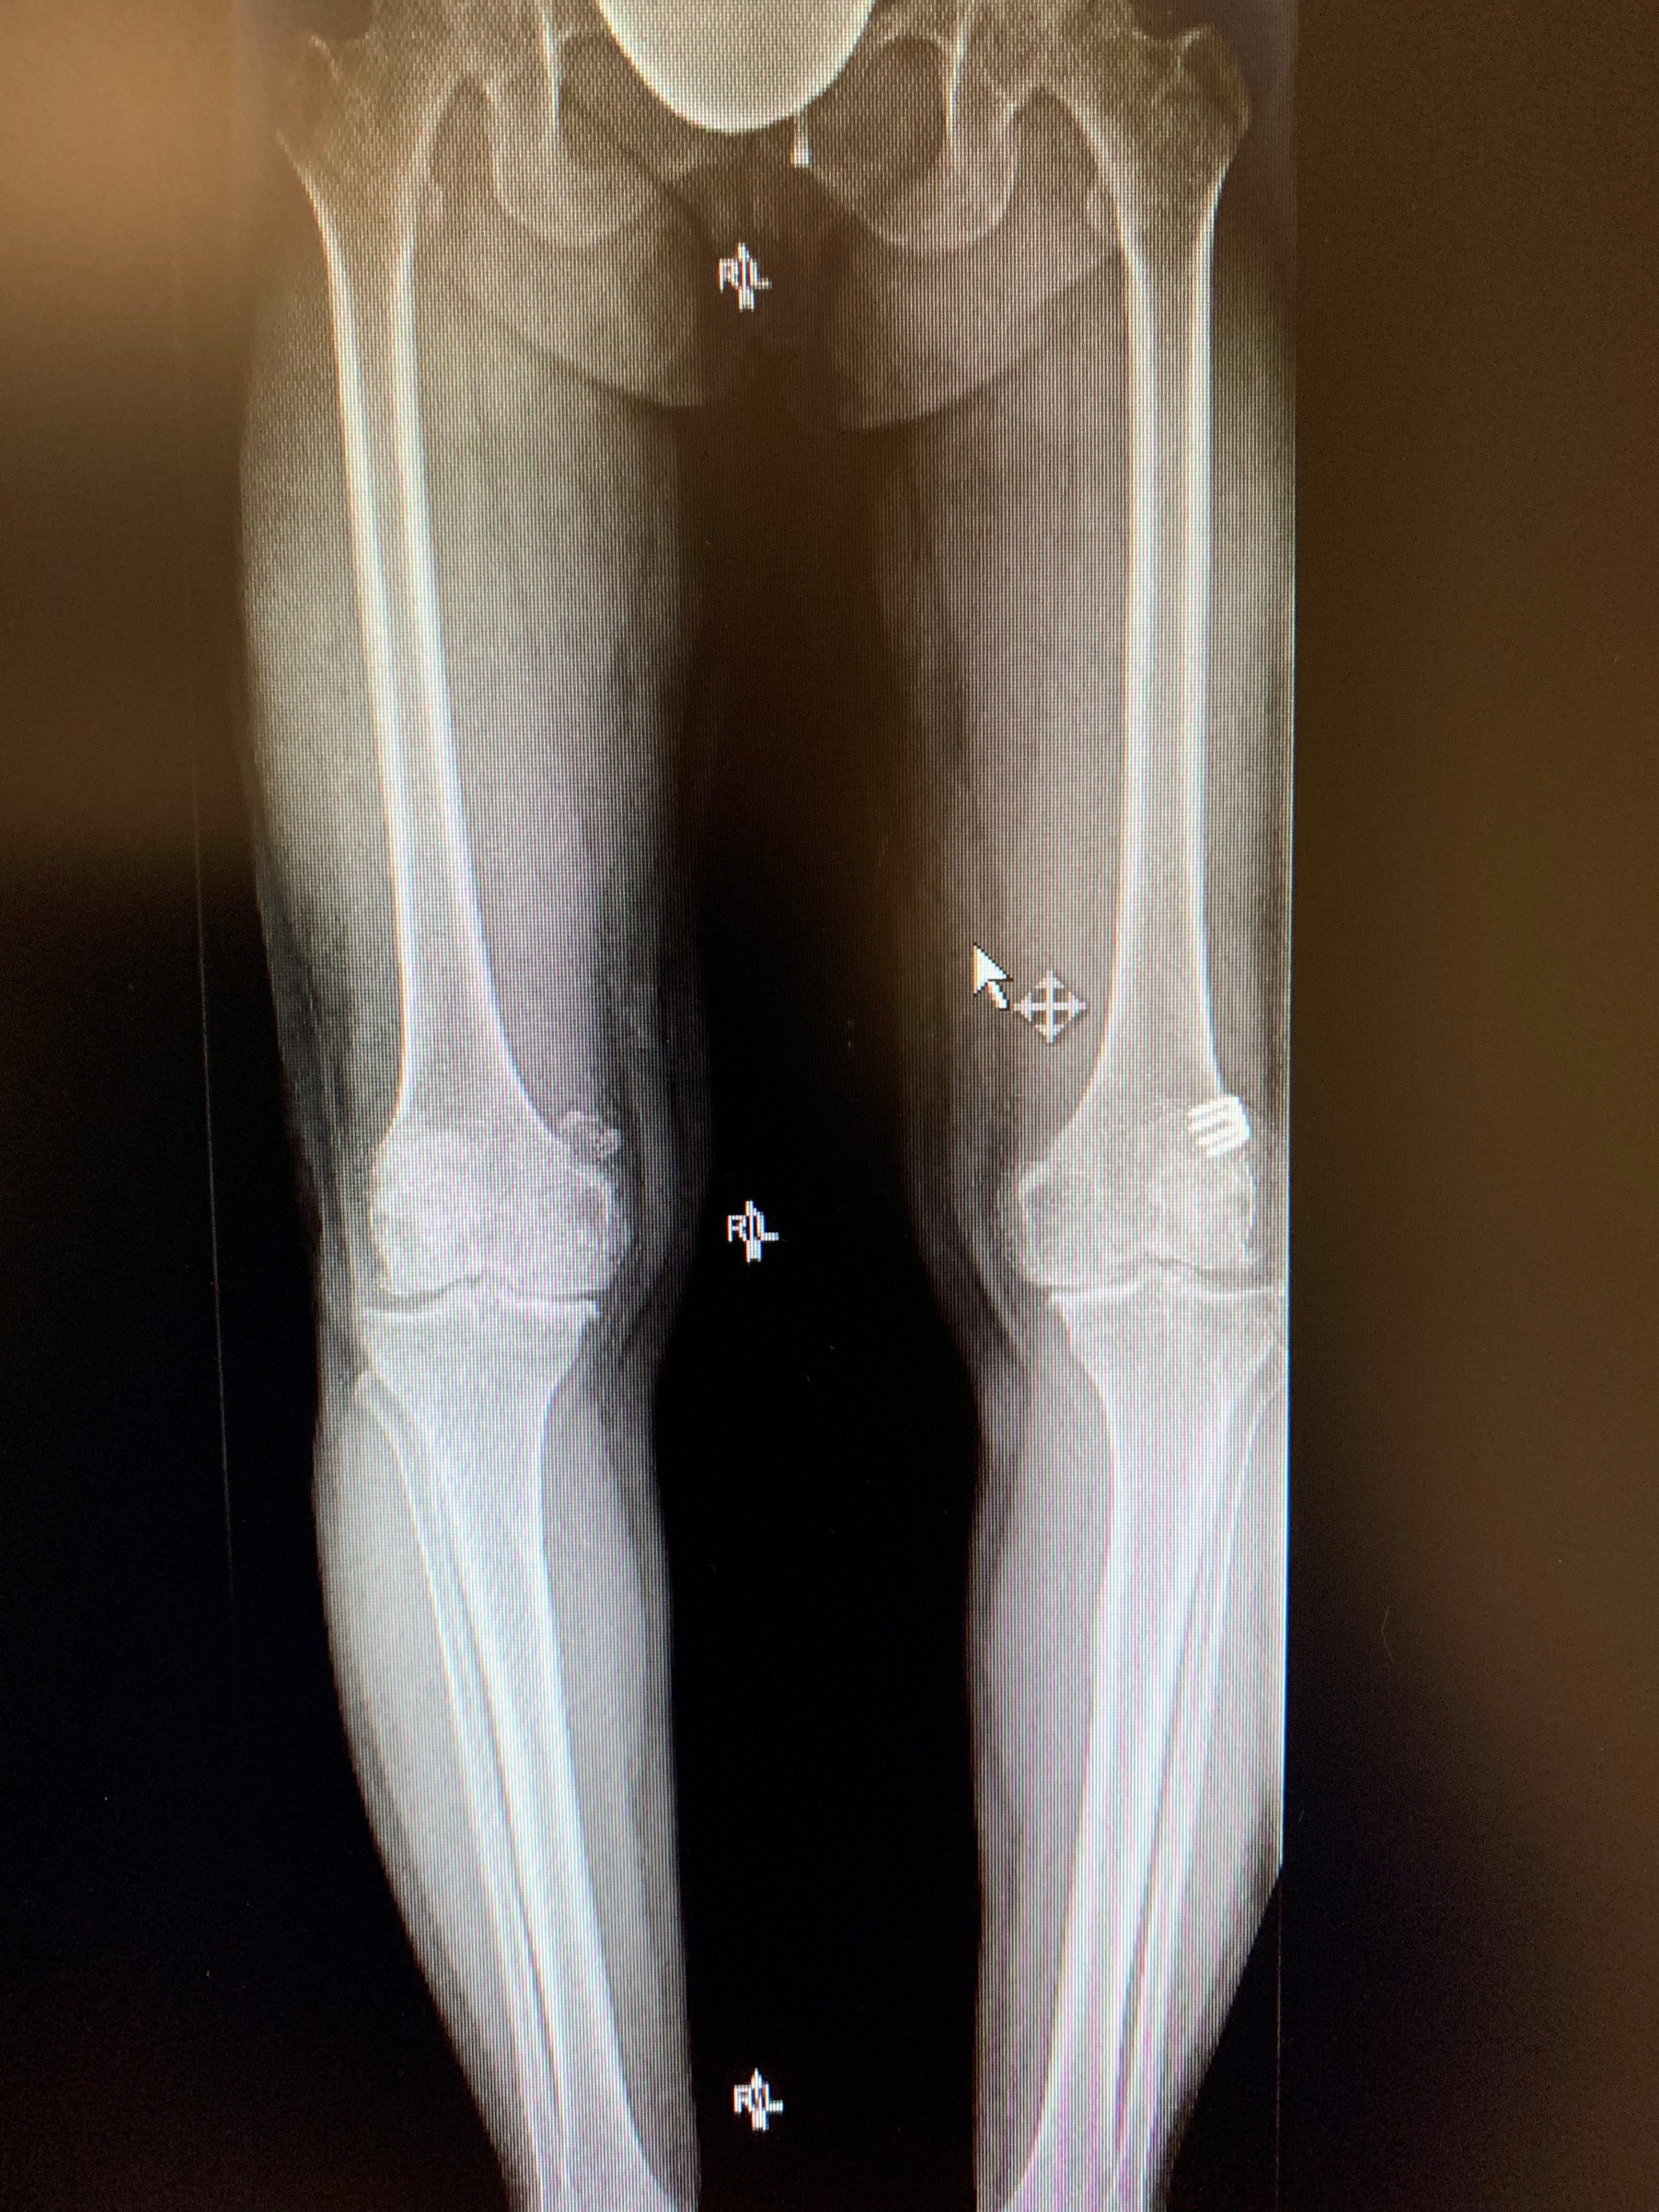 Simultaneous bilateral knee replacement in a 54 year old femalea